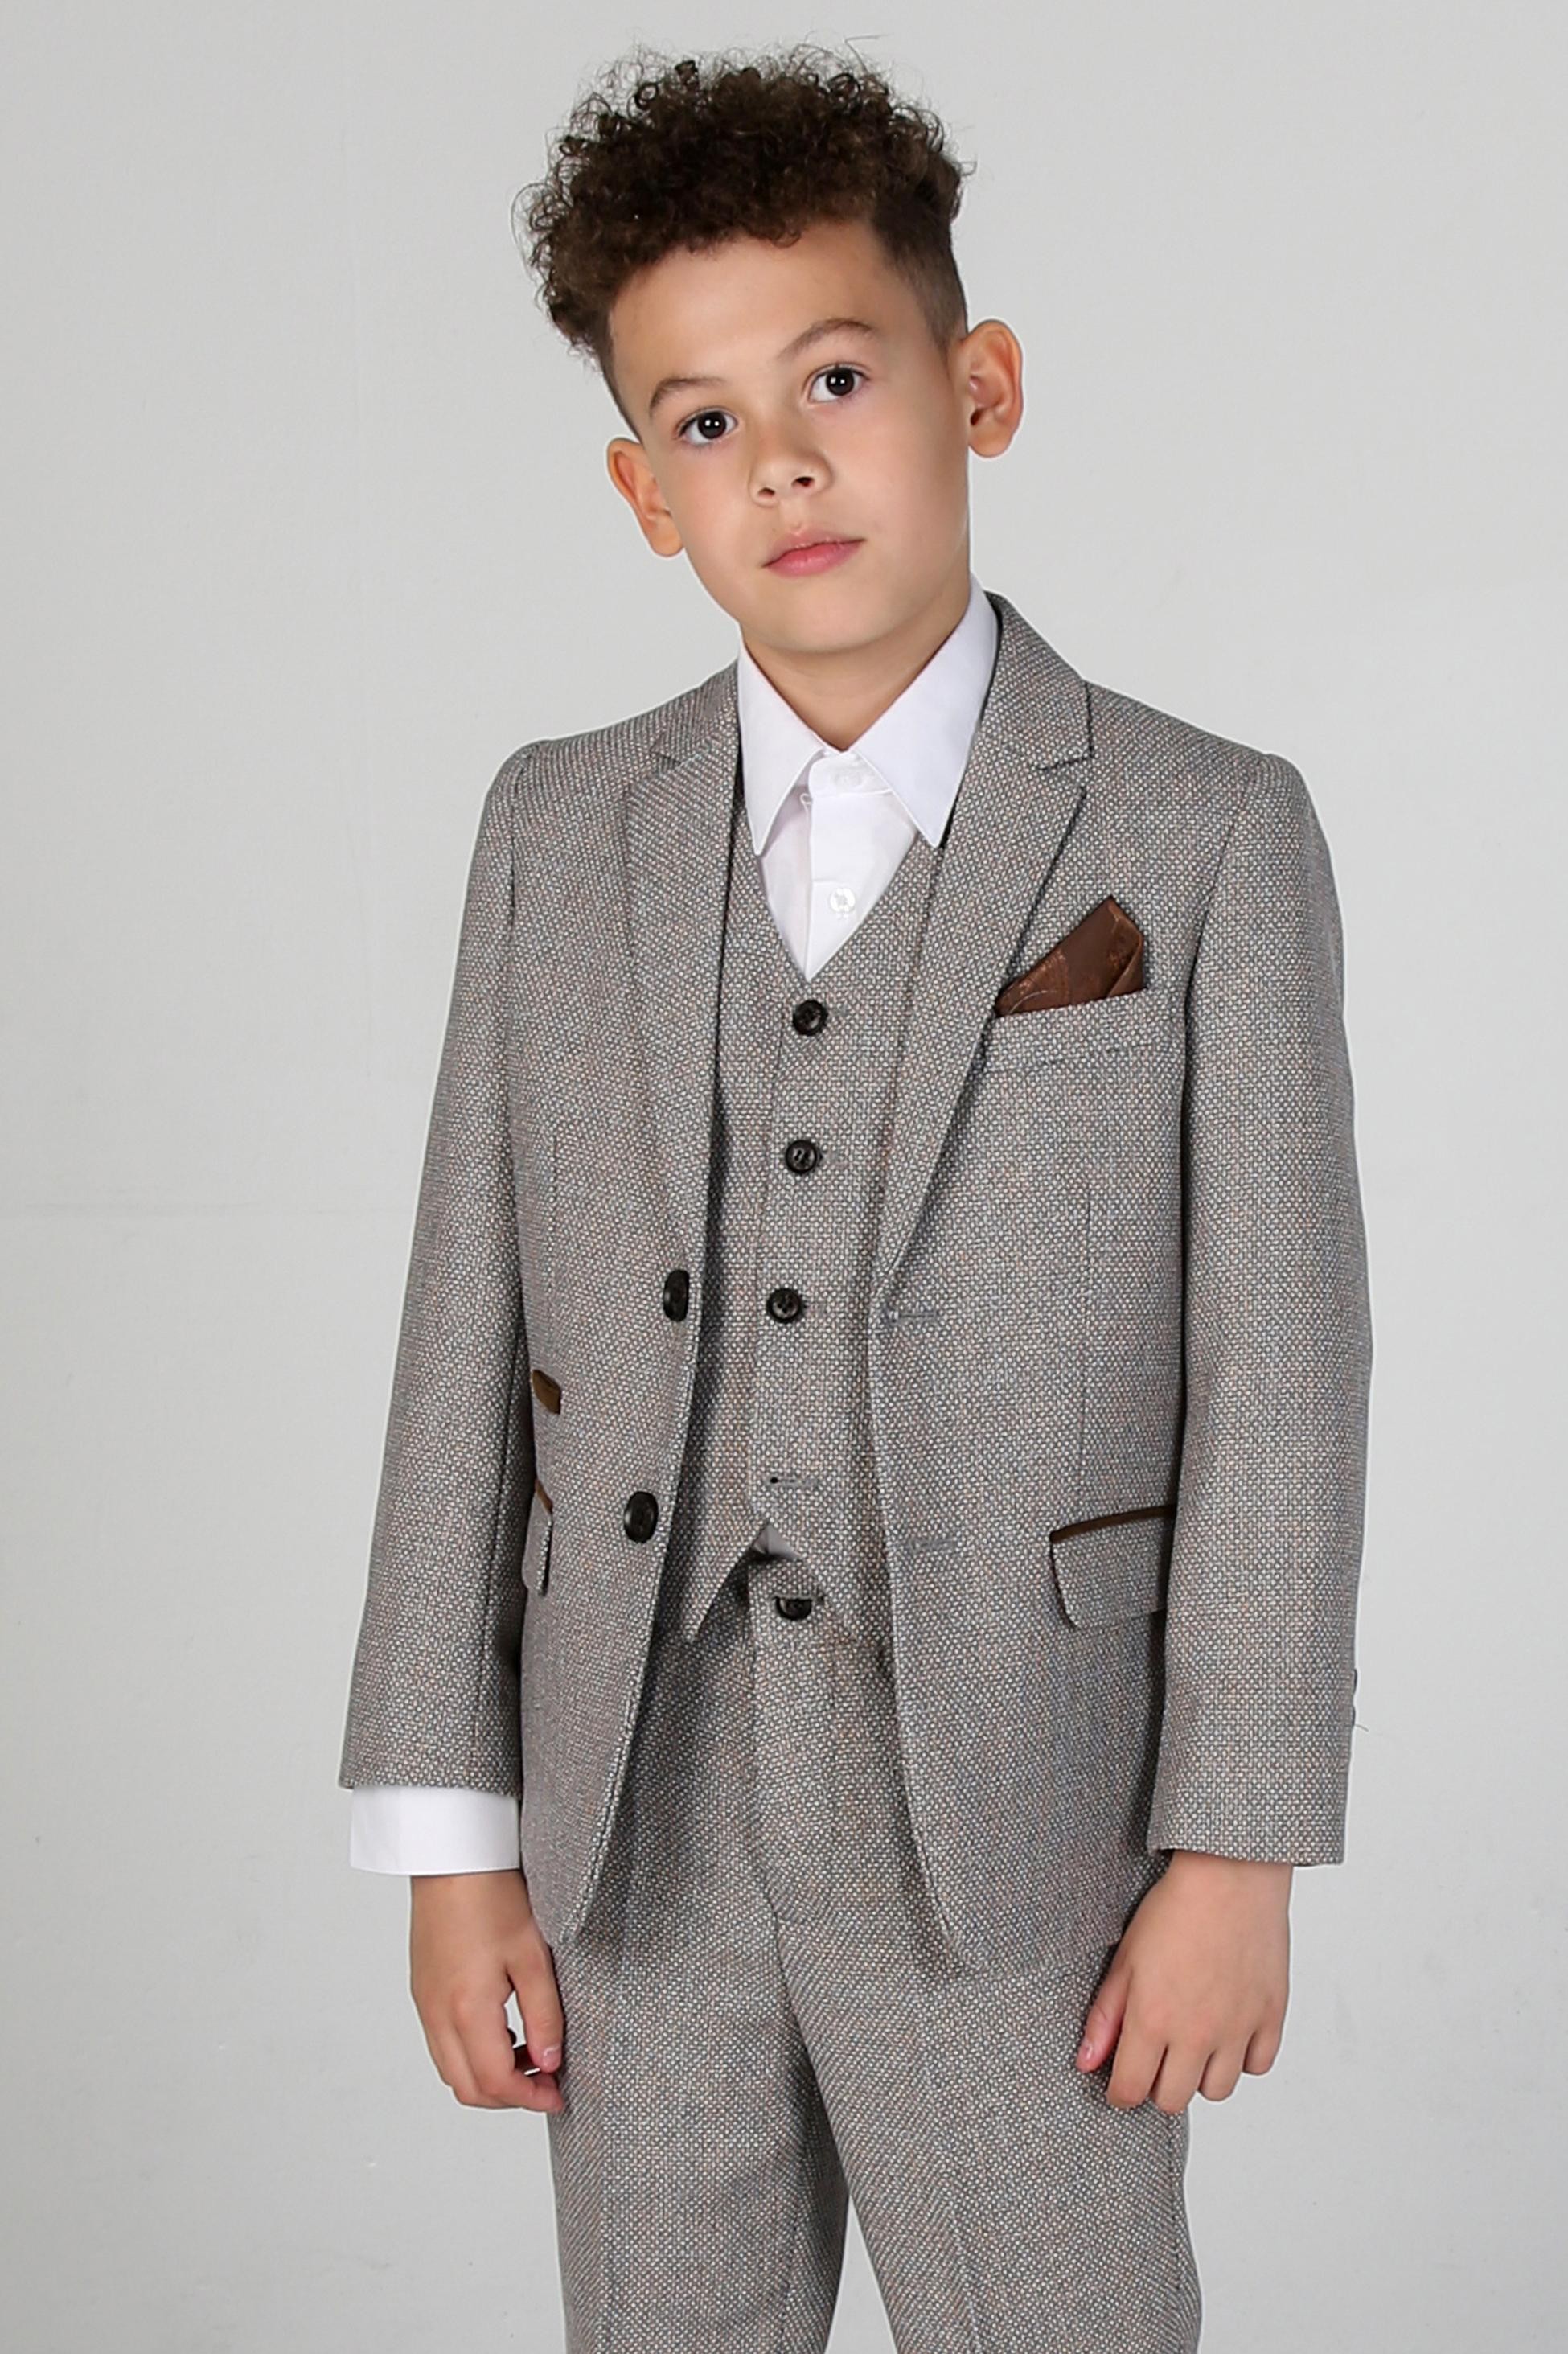 Boys Tweed Tailored Fit Formal Suit - Ralph